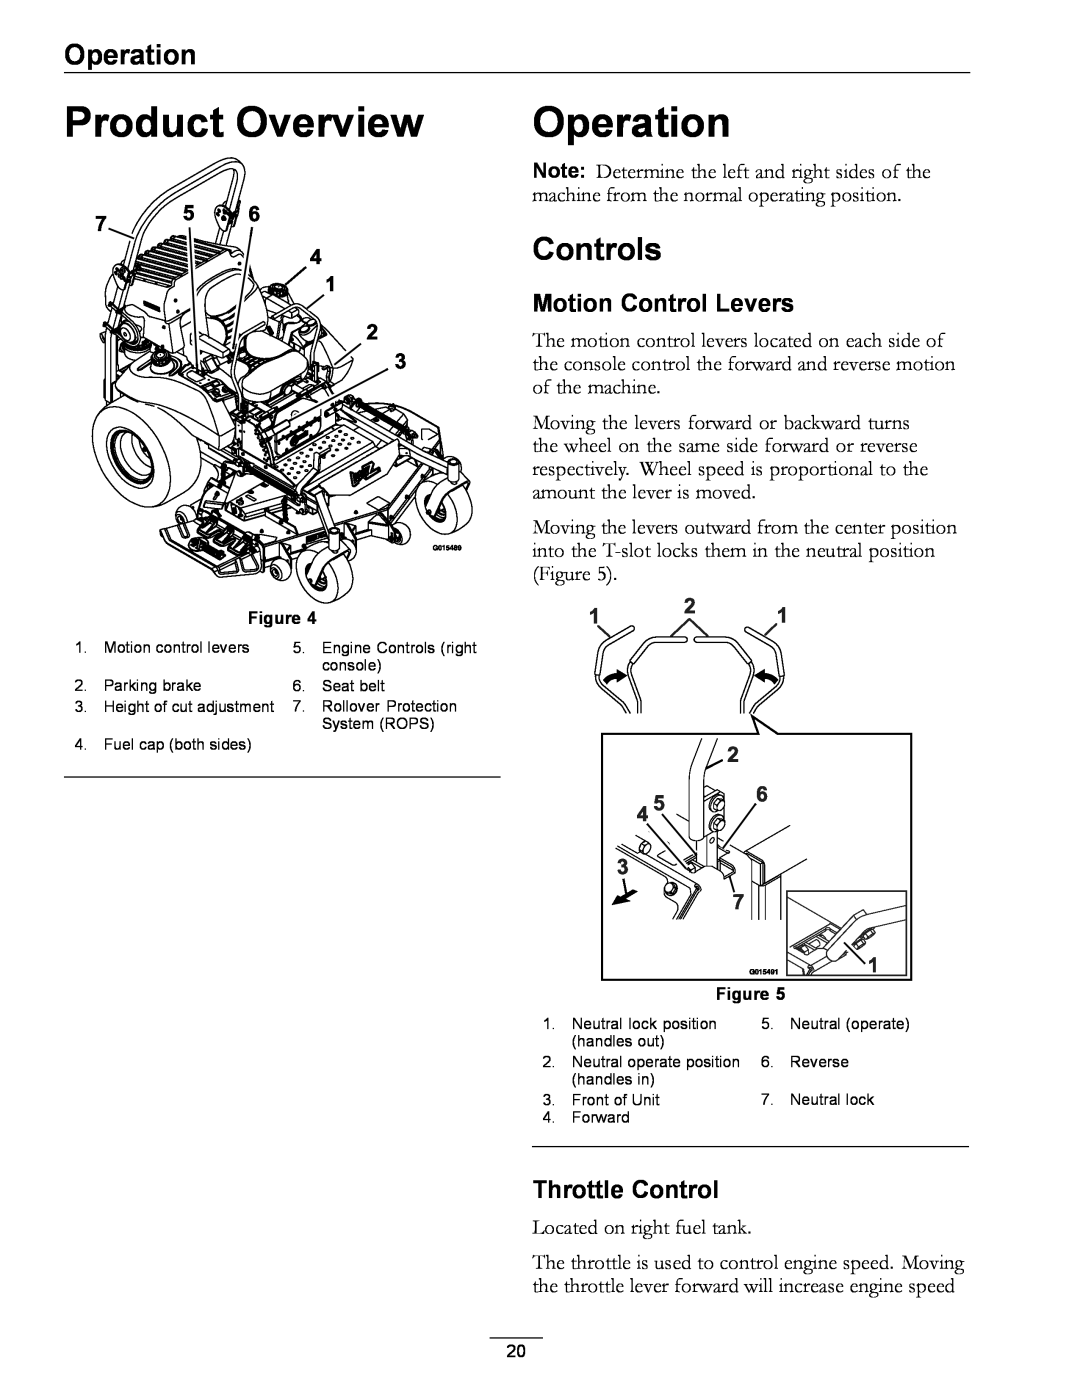 Exmark 920 manual Product Overview, Operation, Controls, Motion Control Levers, Throttle Control 